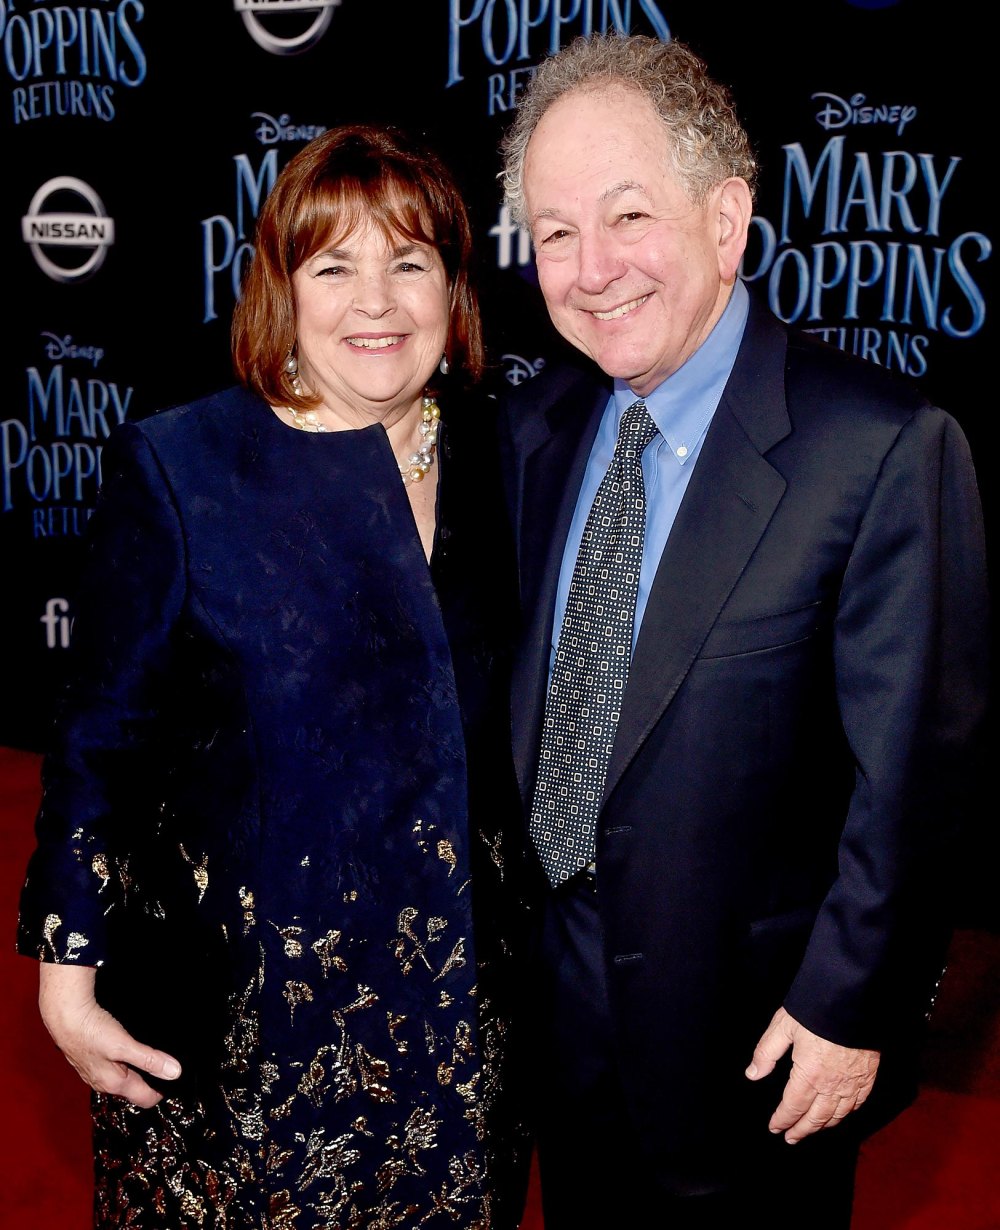 Ina Garten Says Husband Jeffrey Would Have 'Loved' to Have Kids but Wanted Her to Be Happy